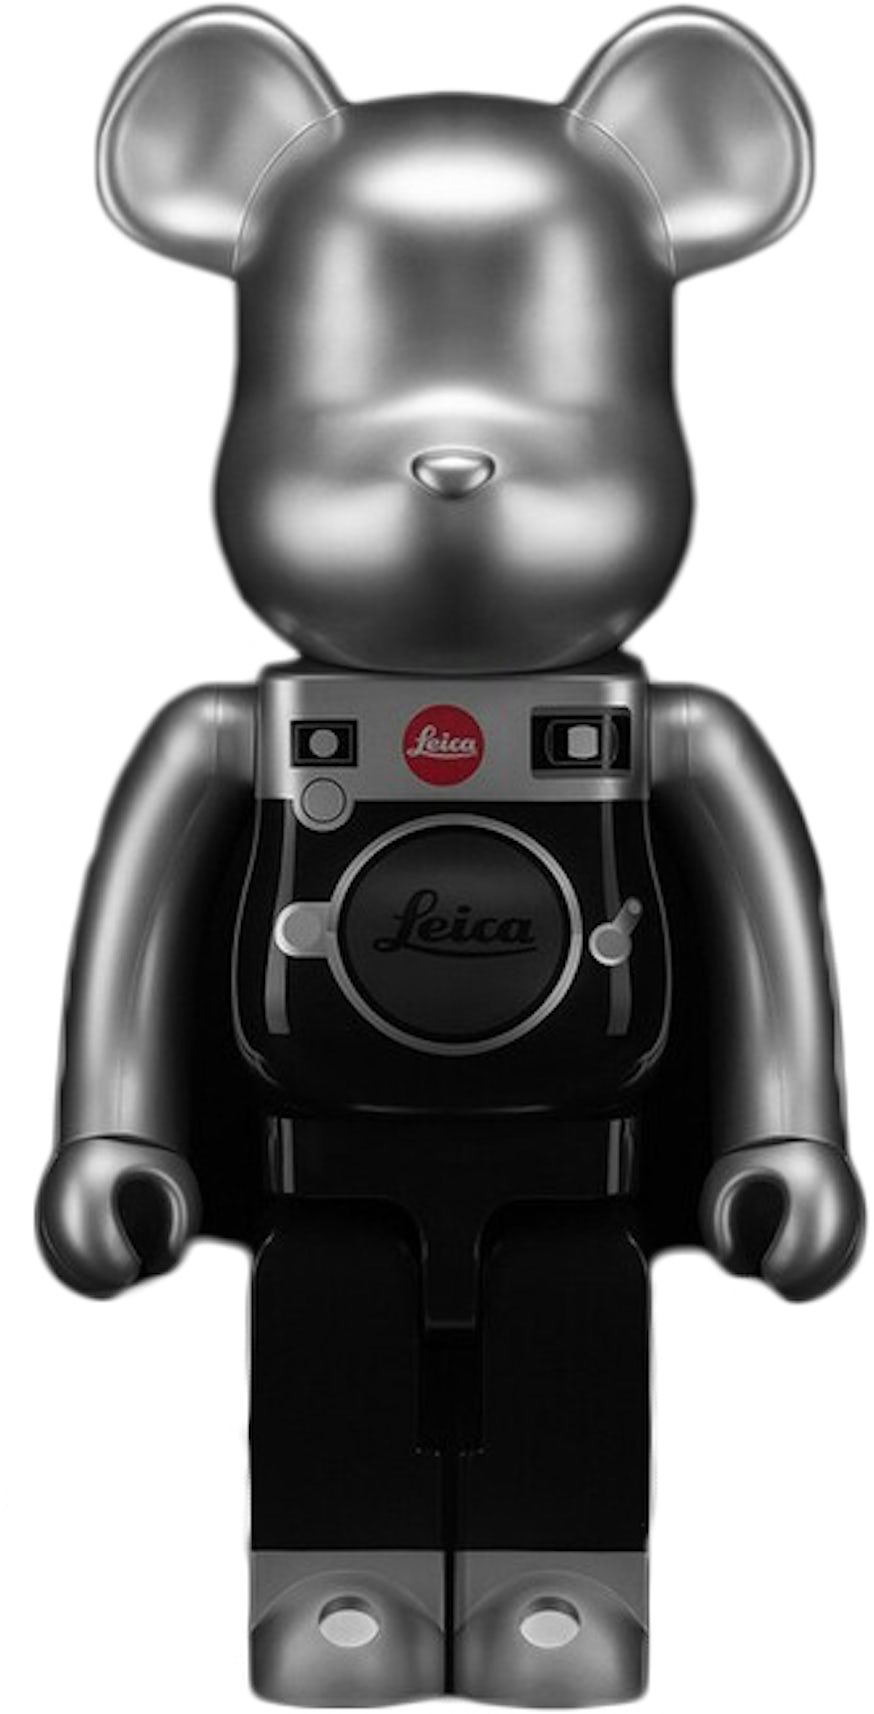 1000% cyclone lewis leather be@rbrick Bearbrick by